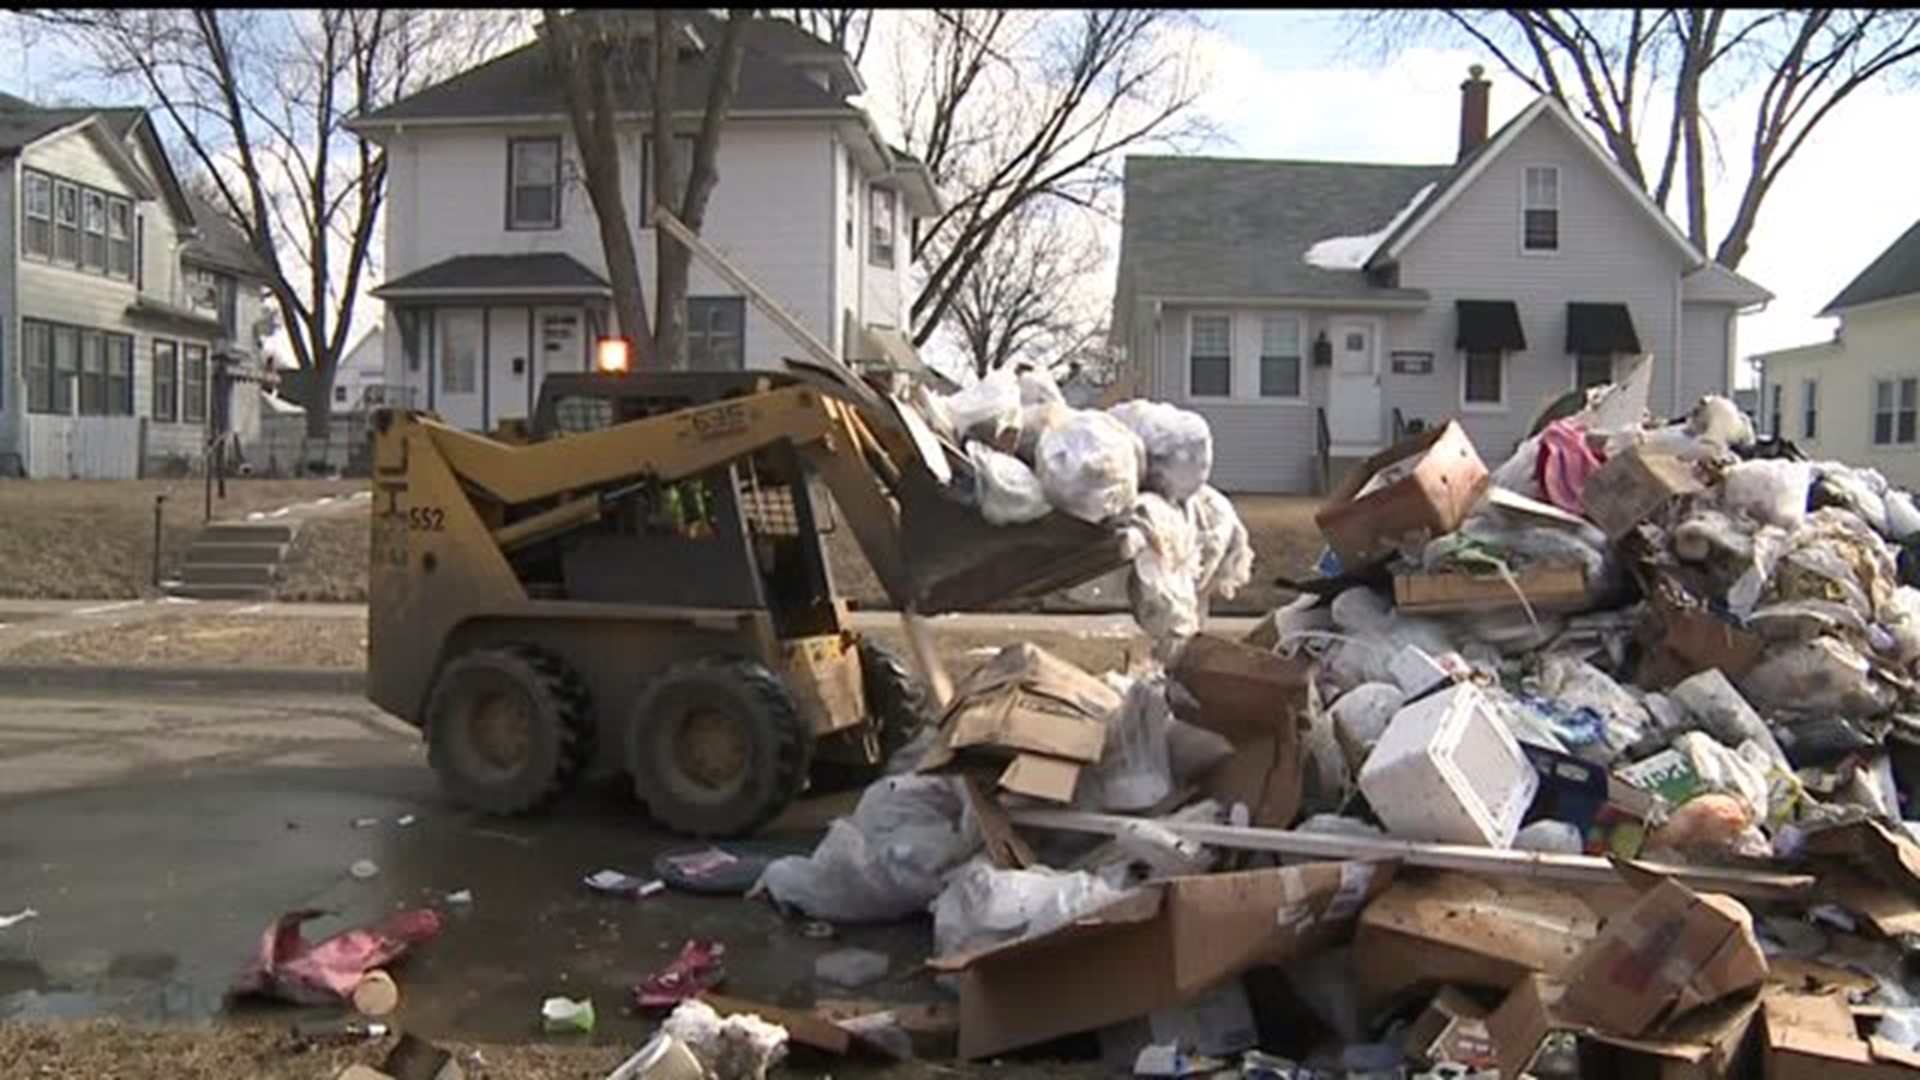 Fire forces trash carrier to dump load in street